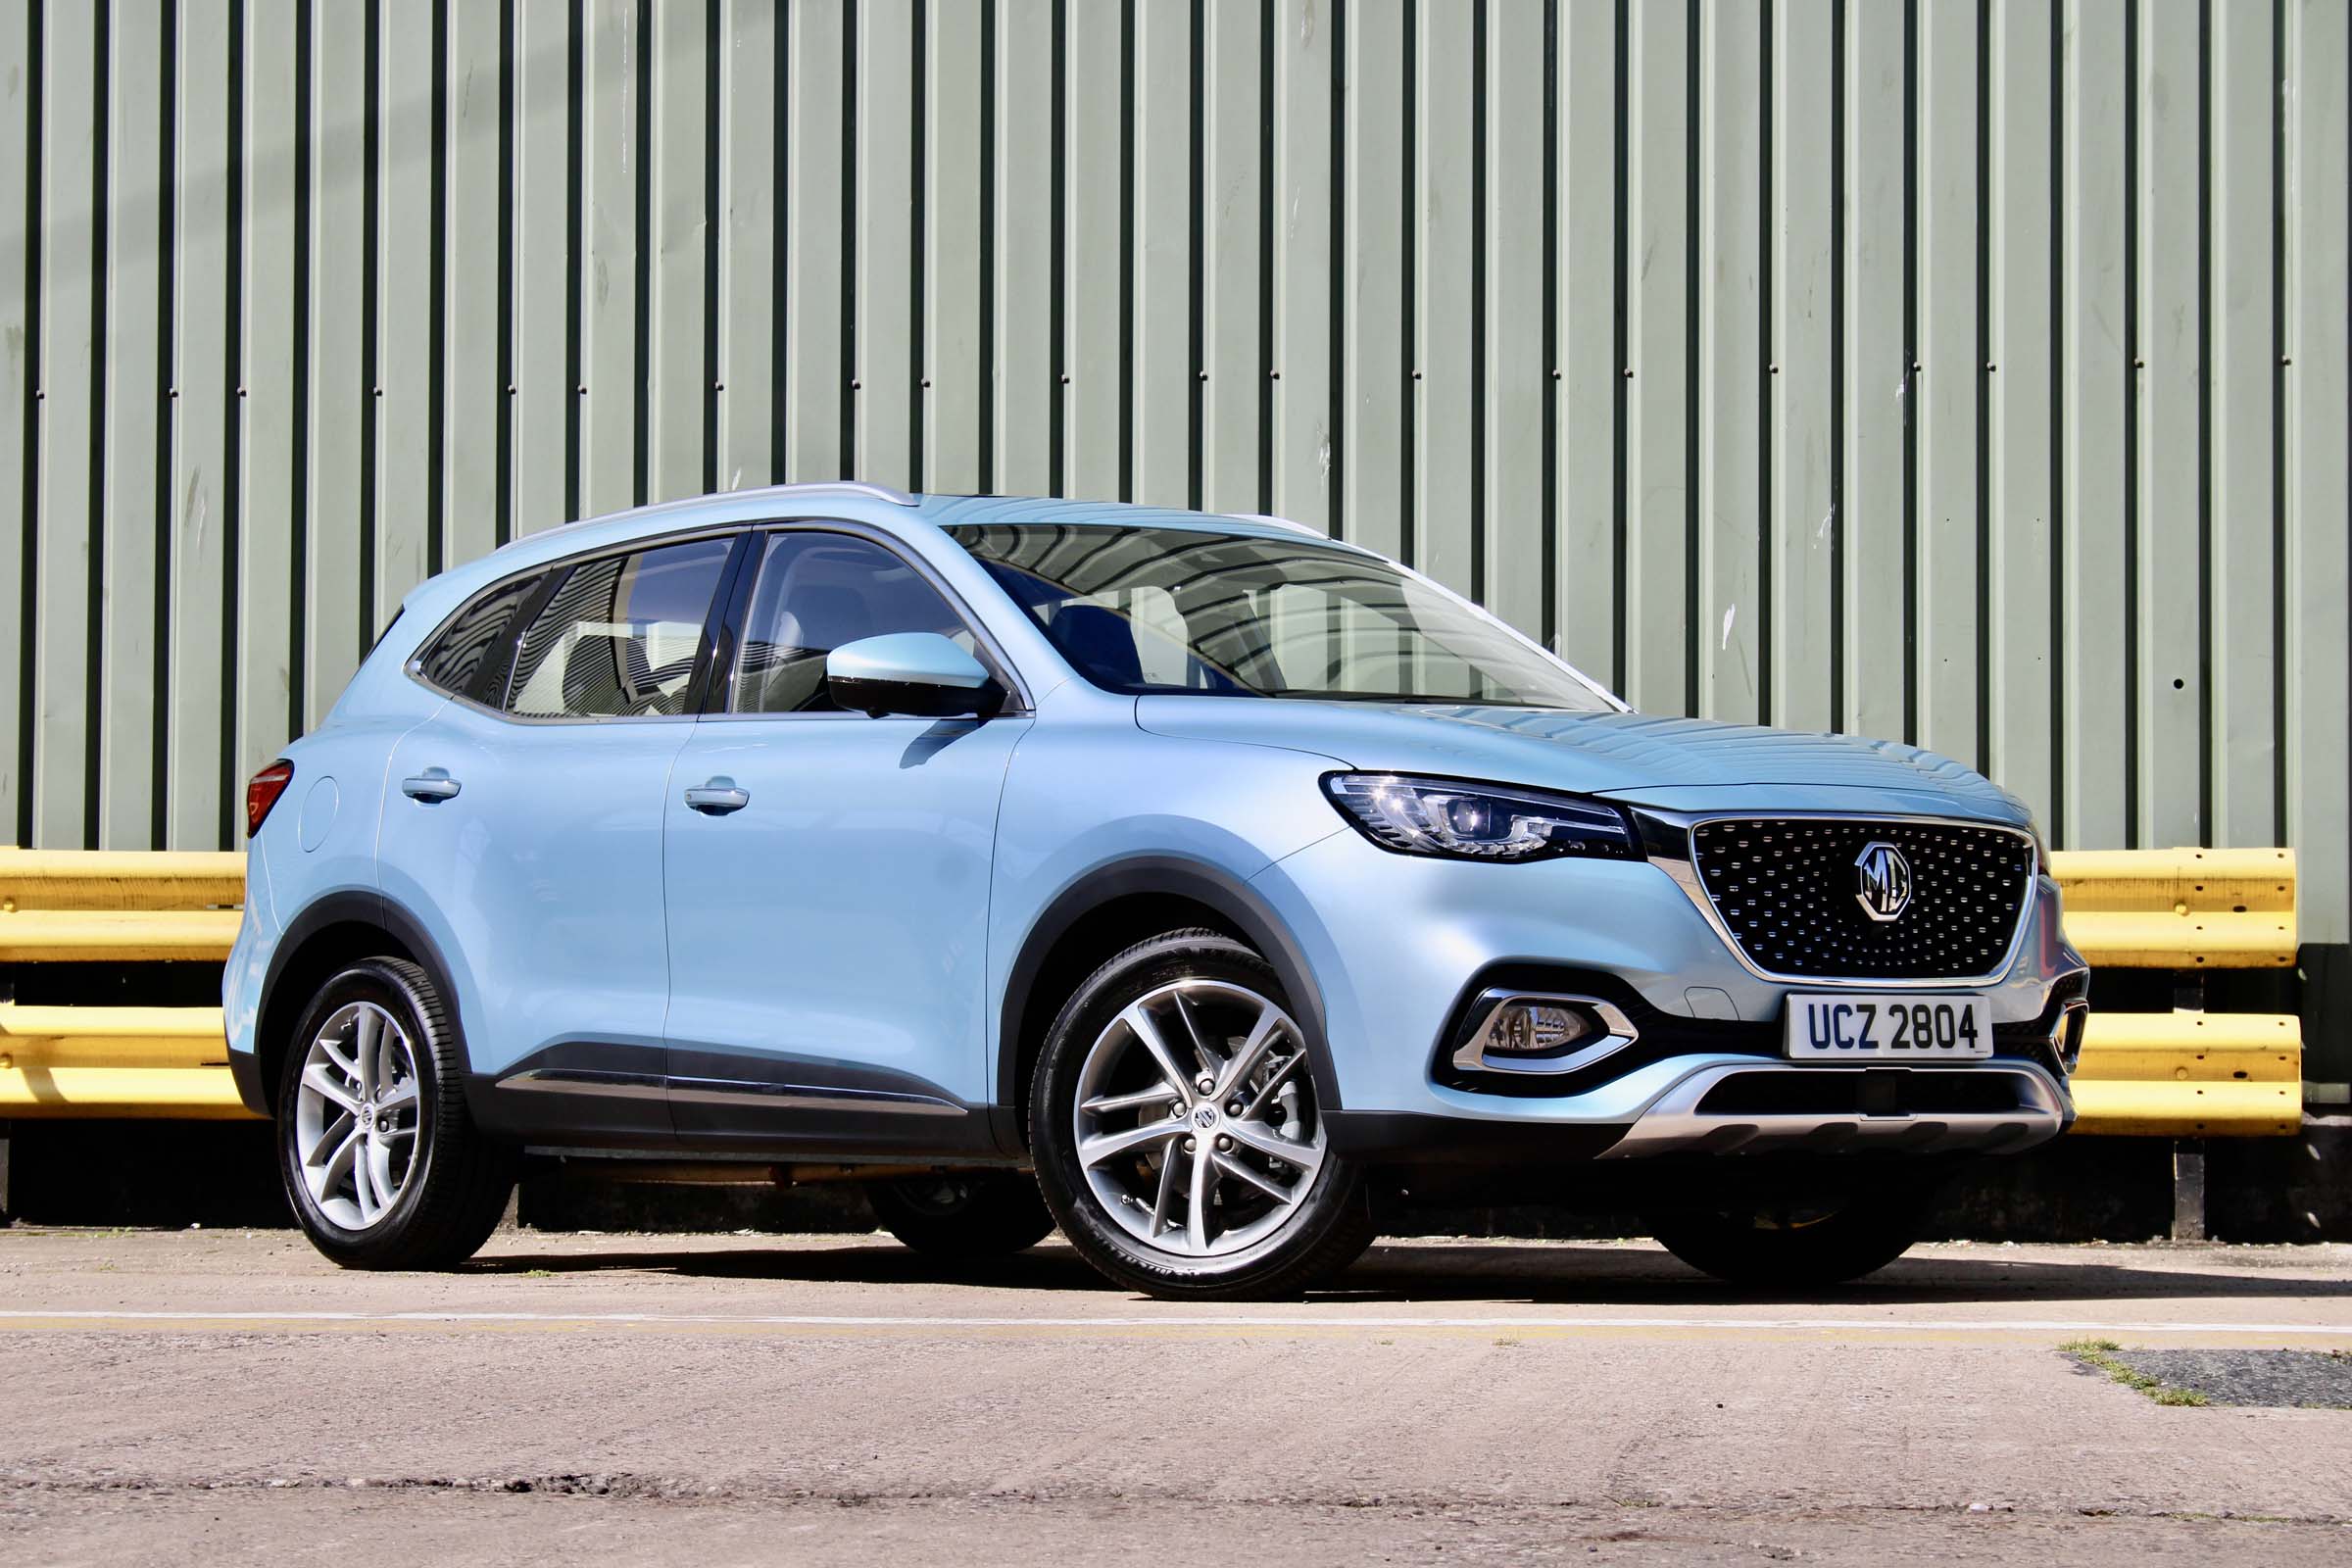 New MG HS Plug-In hybrid SUV: prices, specs and on-sale date